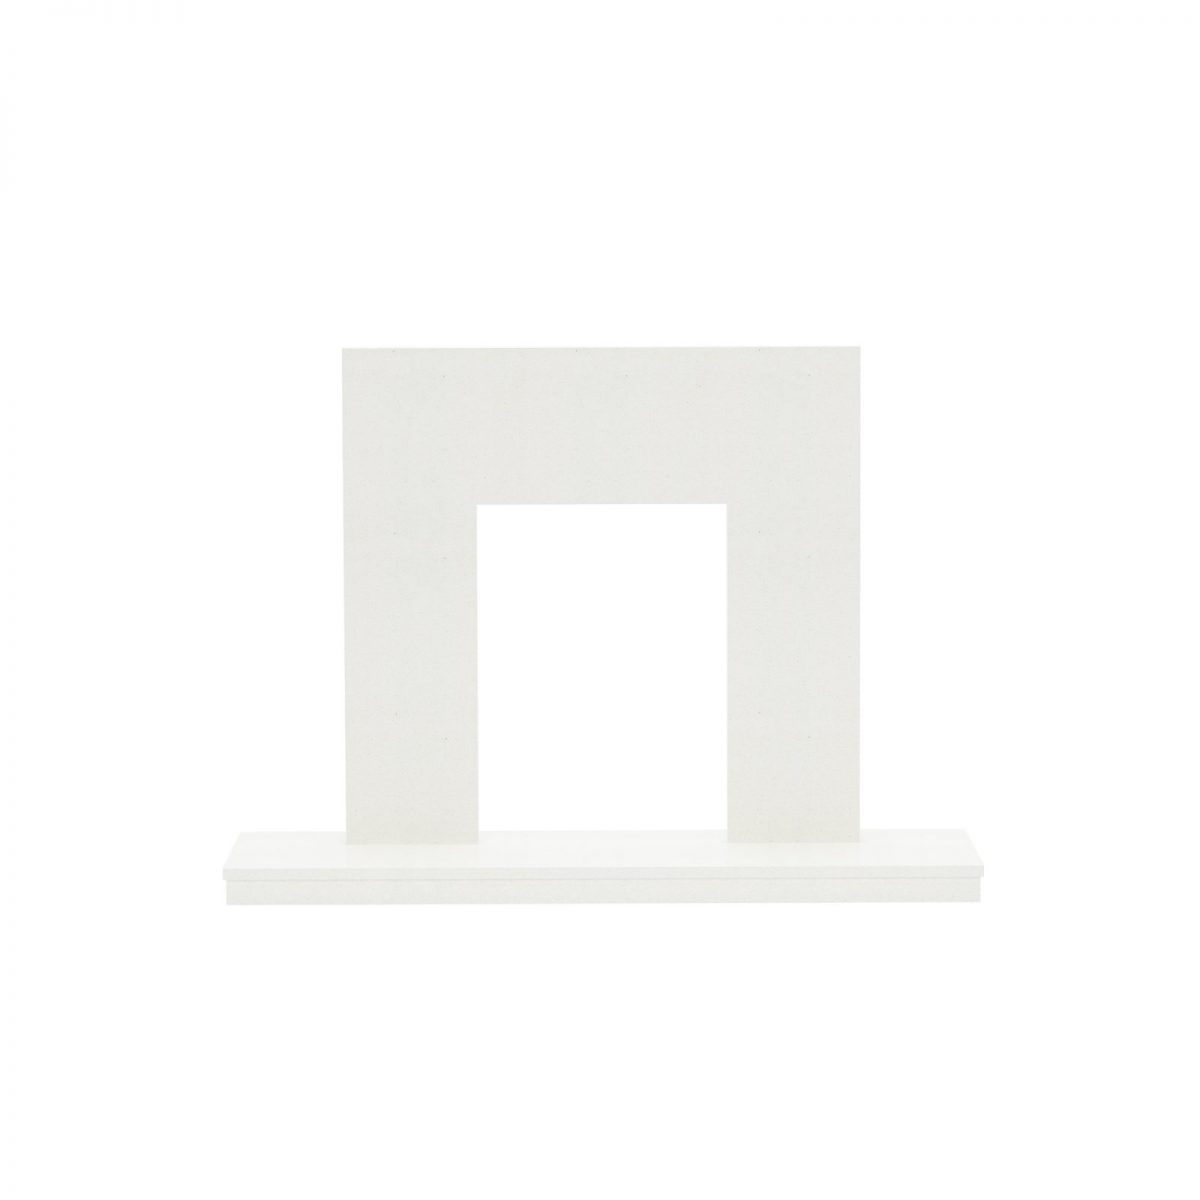 White Marble 1365mm x 400mm (54 x 16″) Standard Lipped Hearth and Back Panel